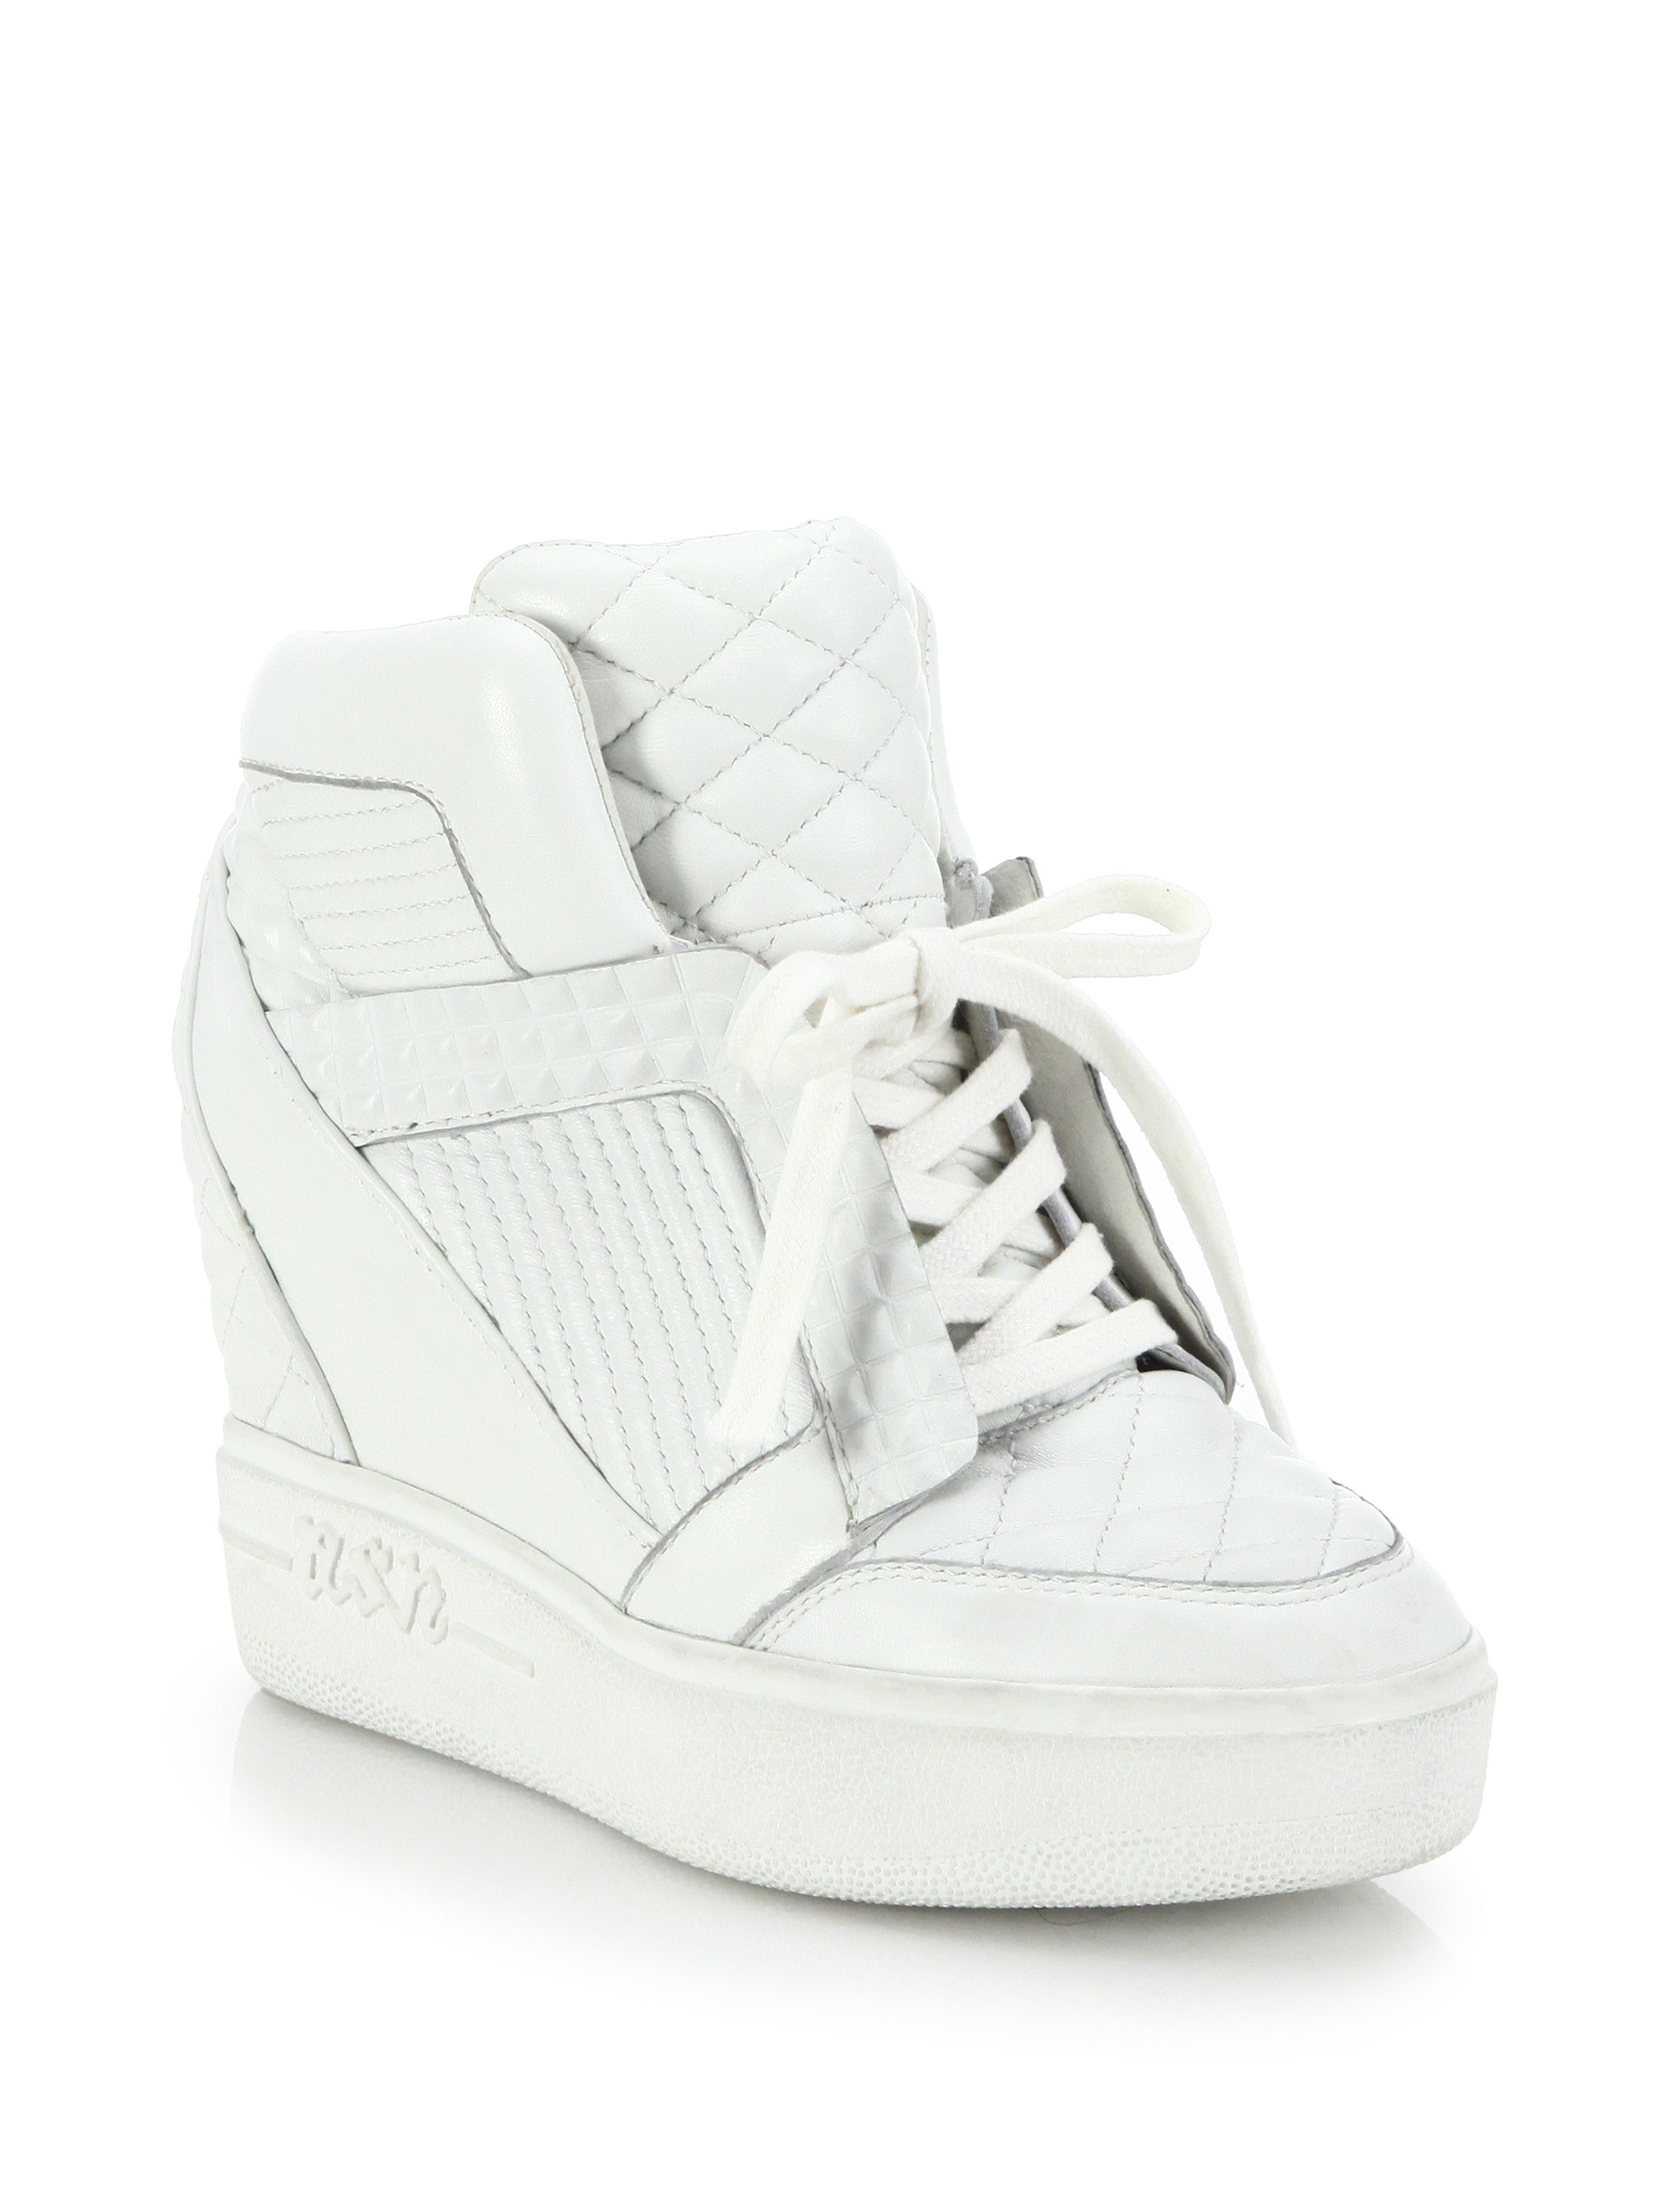 wedge sneakers for women